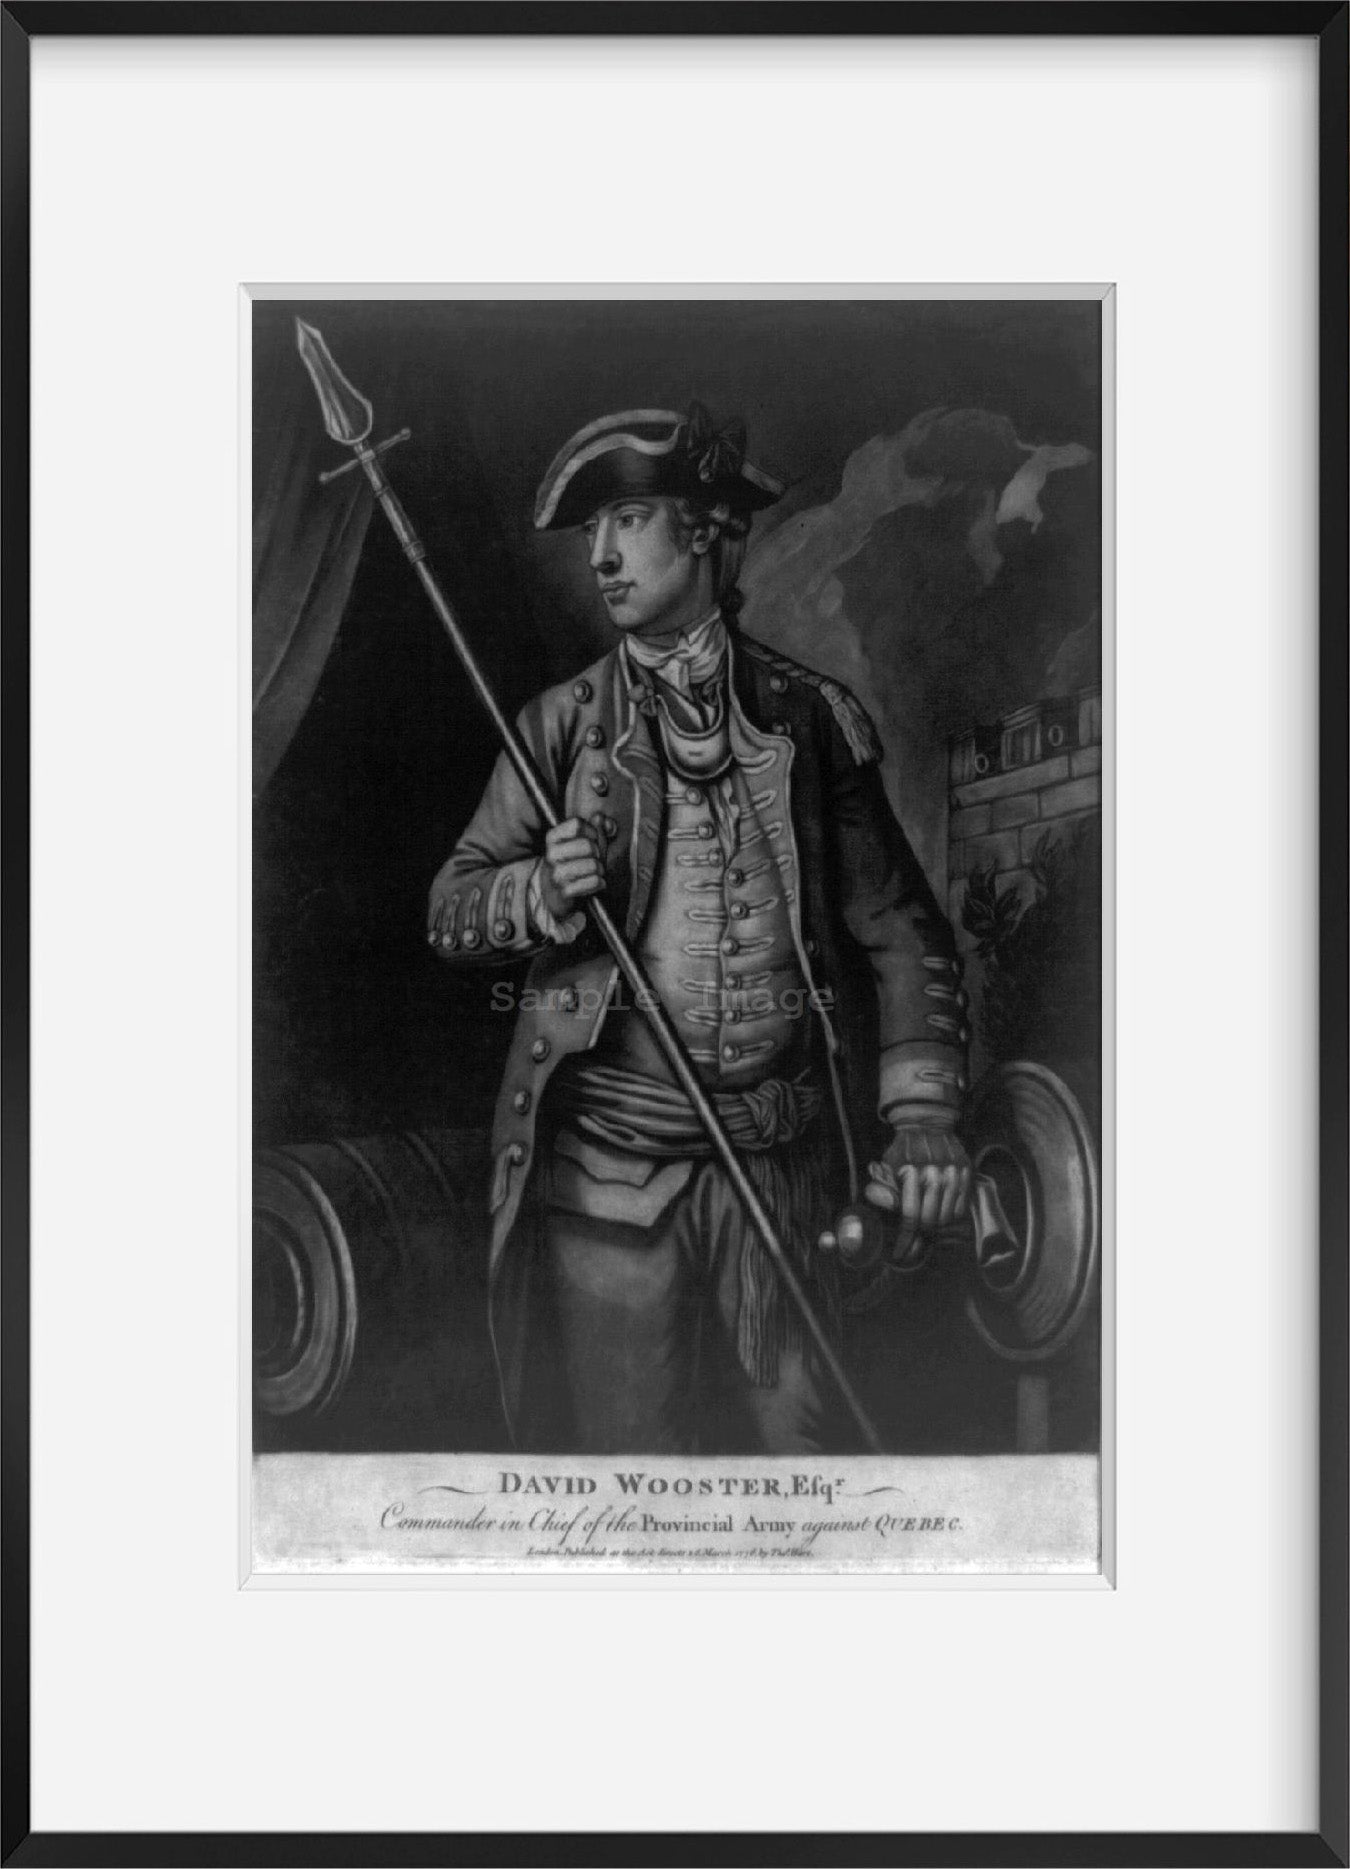 1776 Photo David Wooster, Esq'r. - commander in chief of the Provincial Army aga